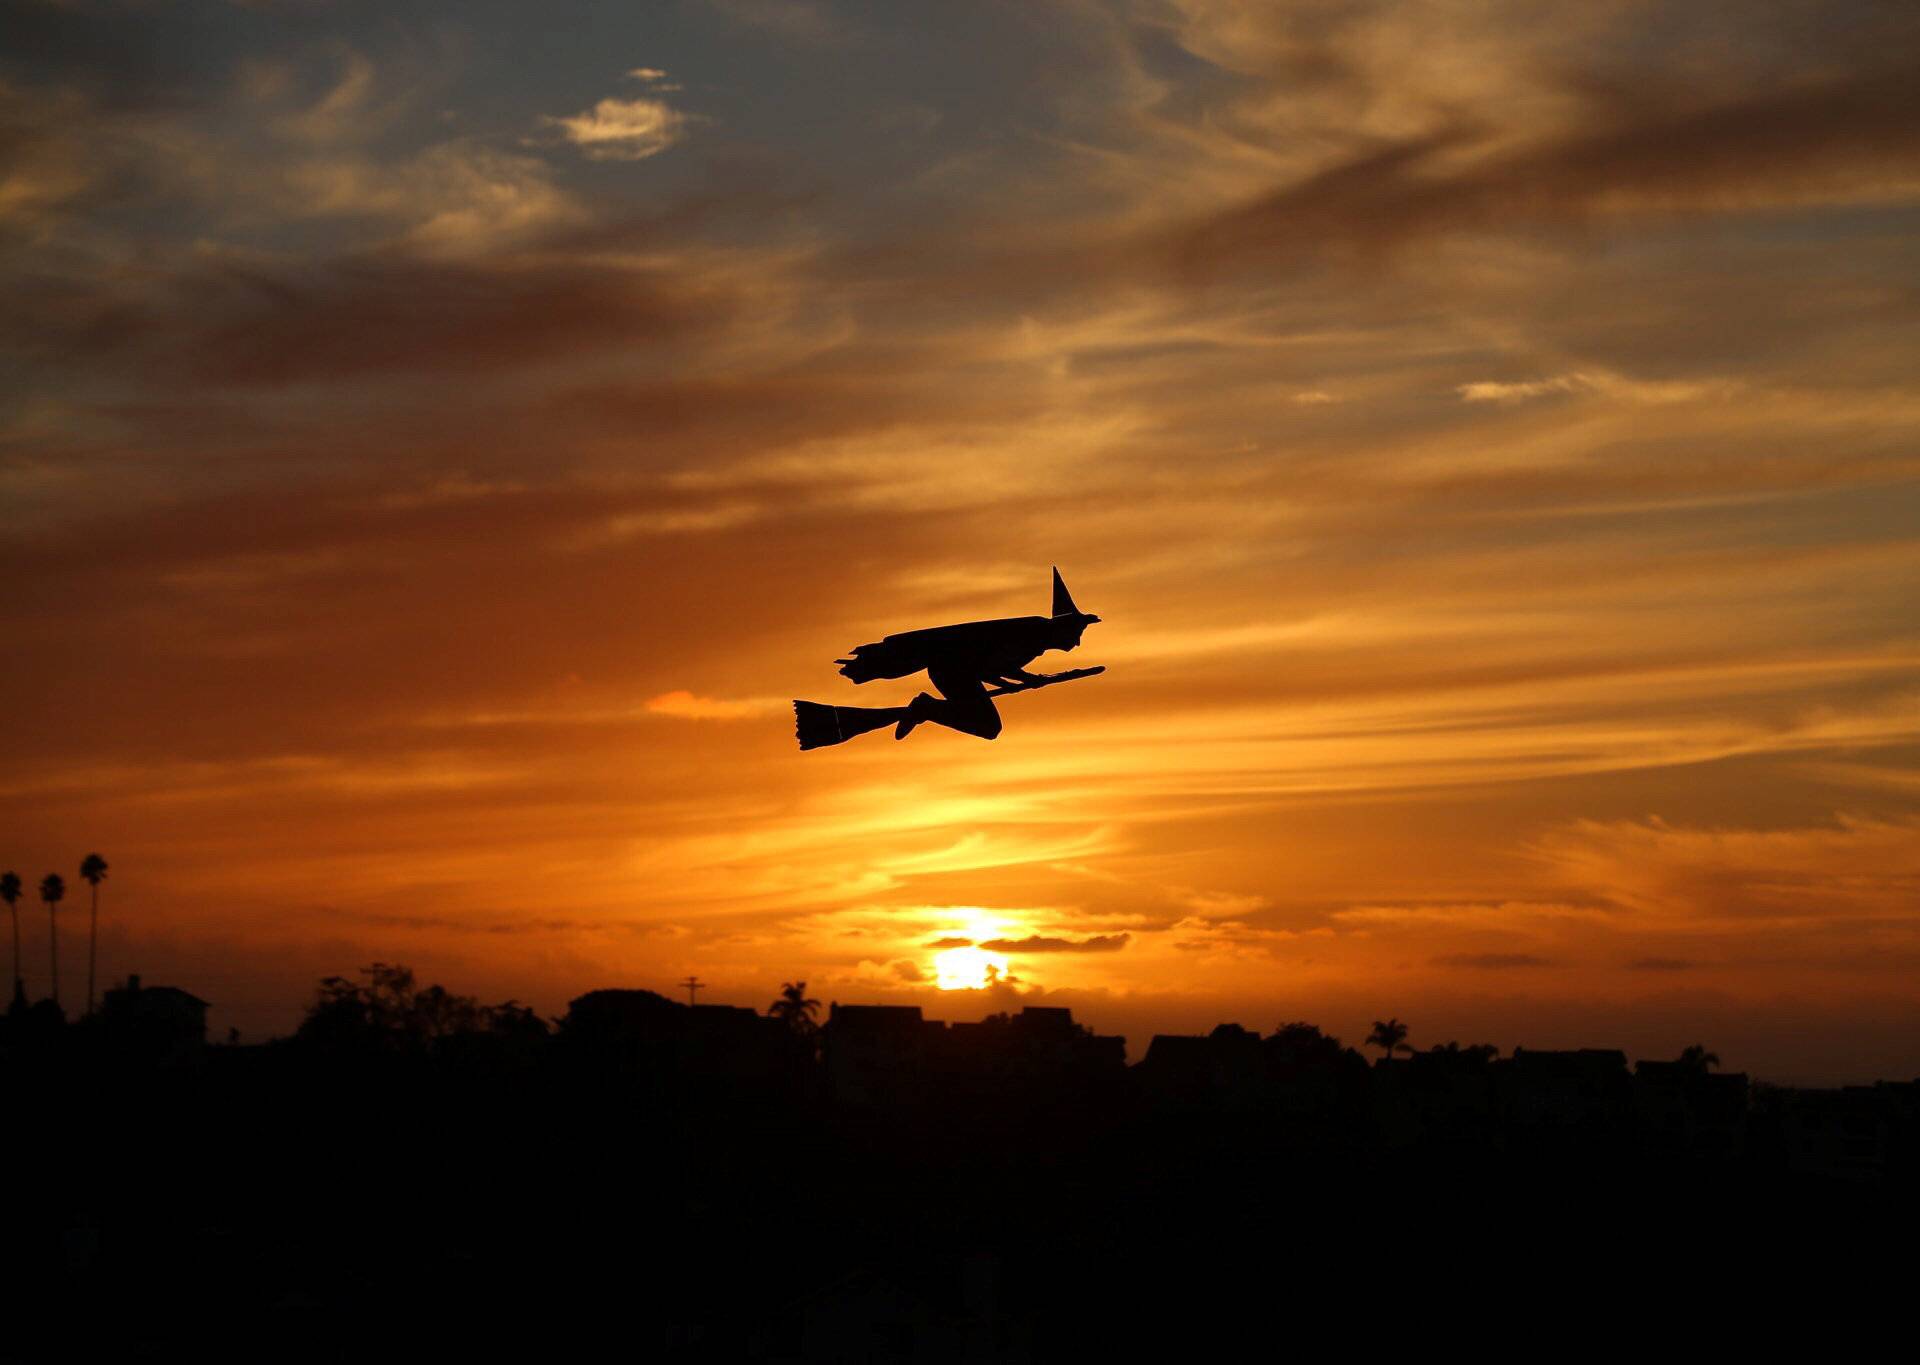 A remote-controlled plane in the form of a witch flies over a neighborhood as the sun sets during Halloween in Encinitas